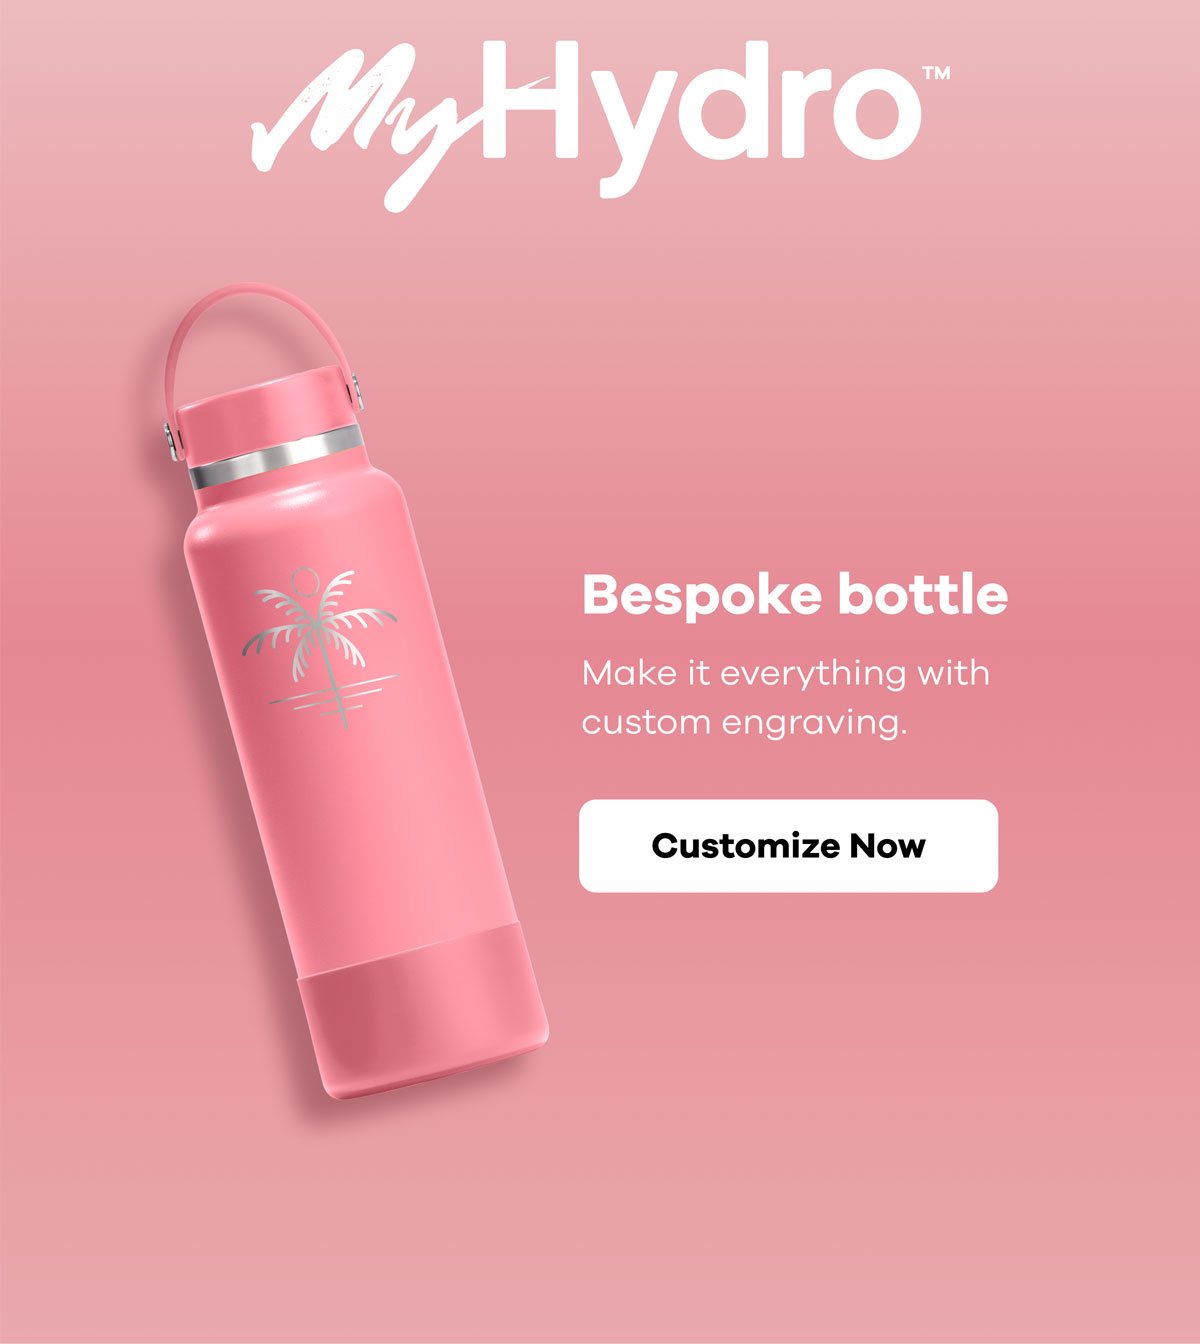 Hydro Flask Crystal Cup Pinky Pinky 